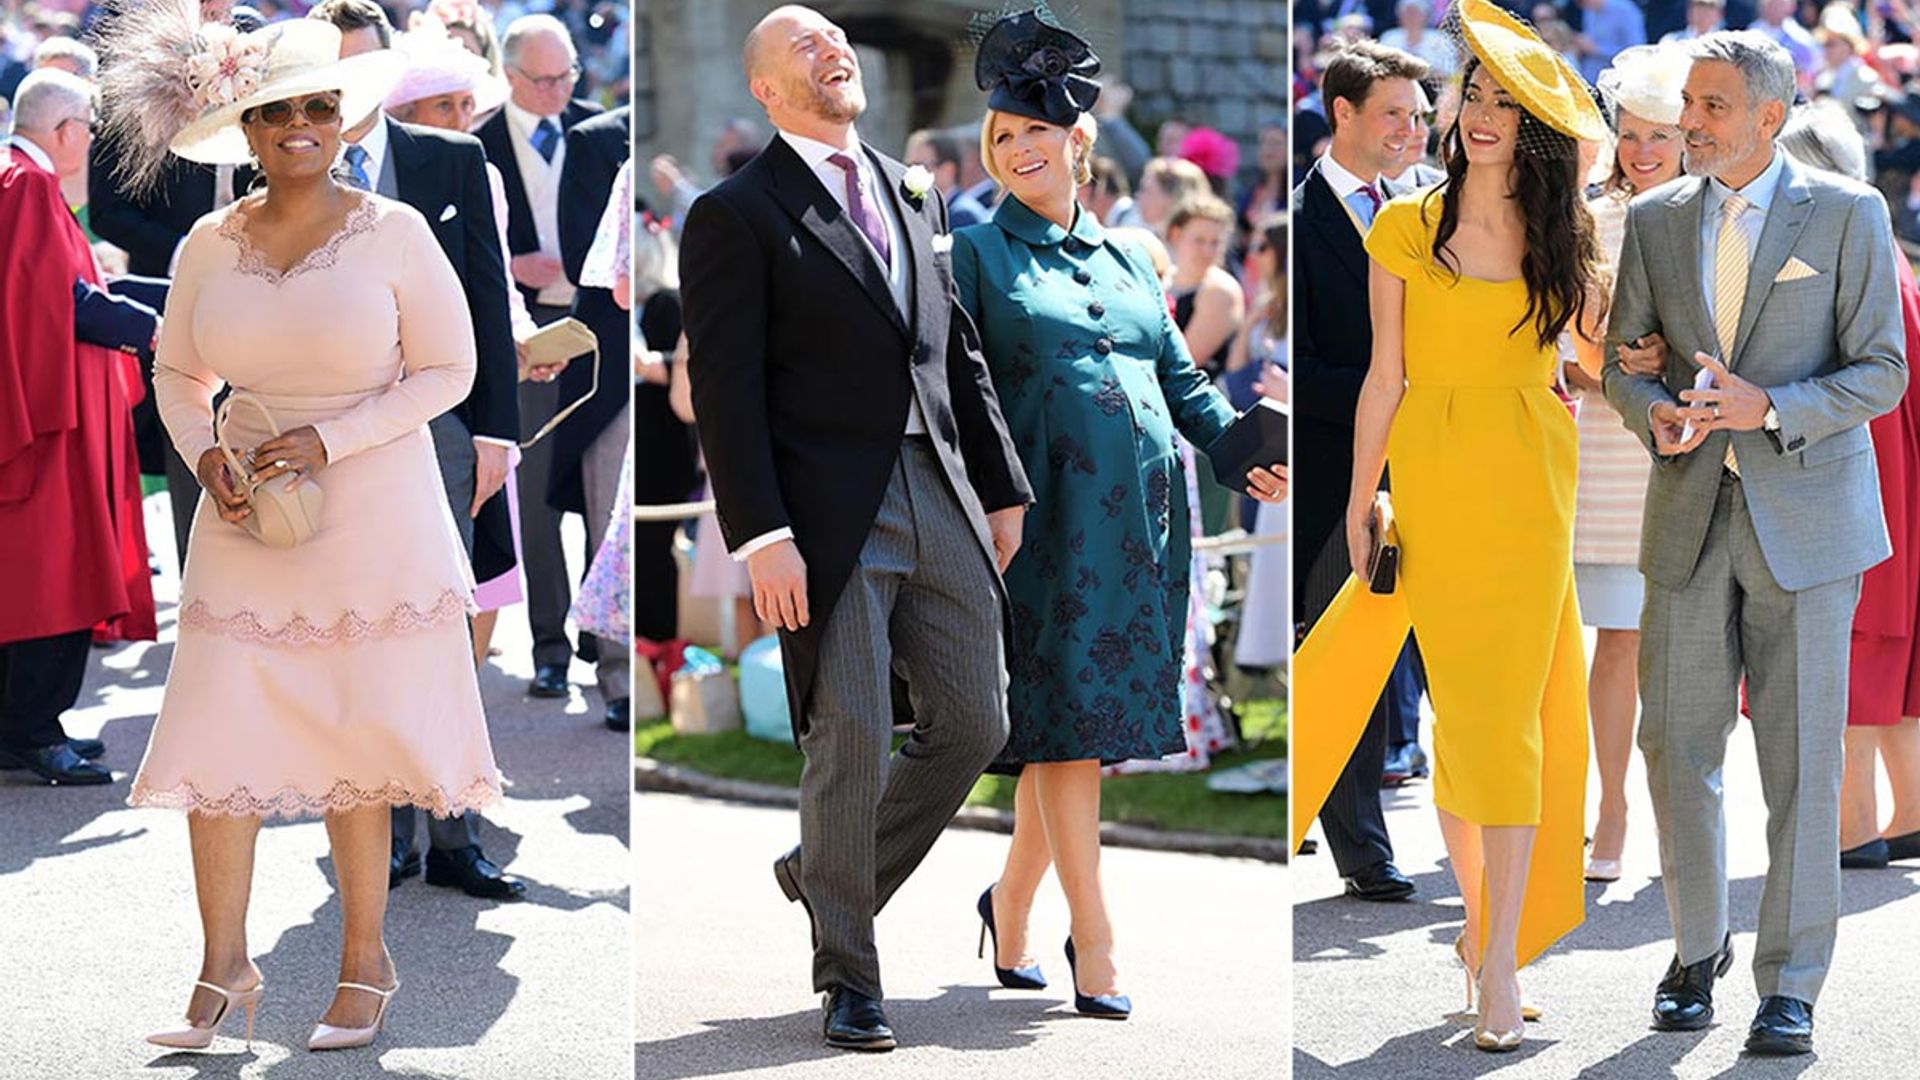 Take a look back at all the stylish guests that attended Prince Harry and Meghan Markle's wedding